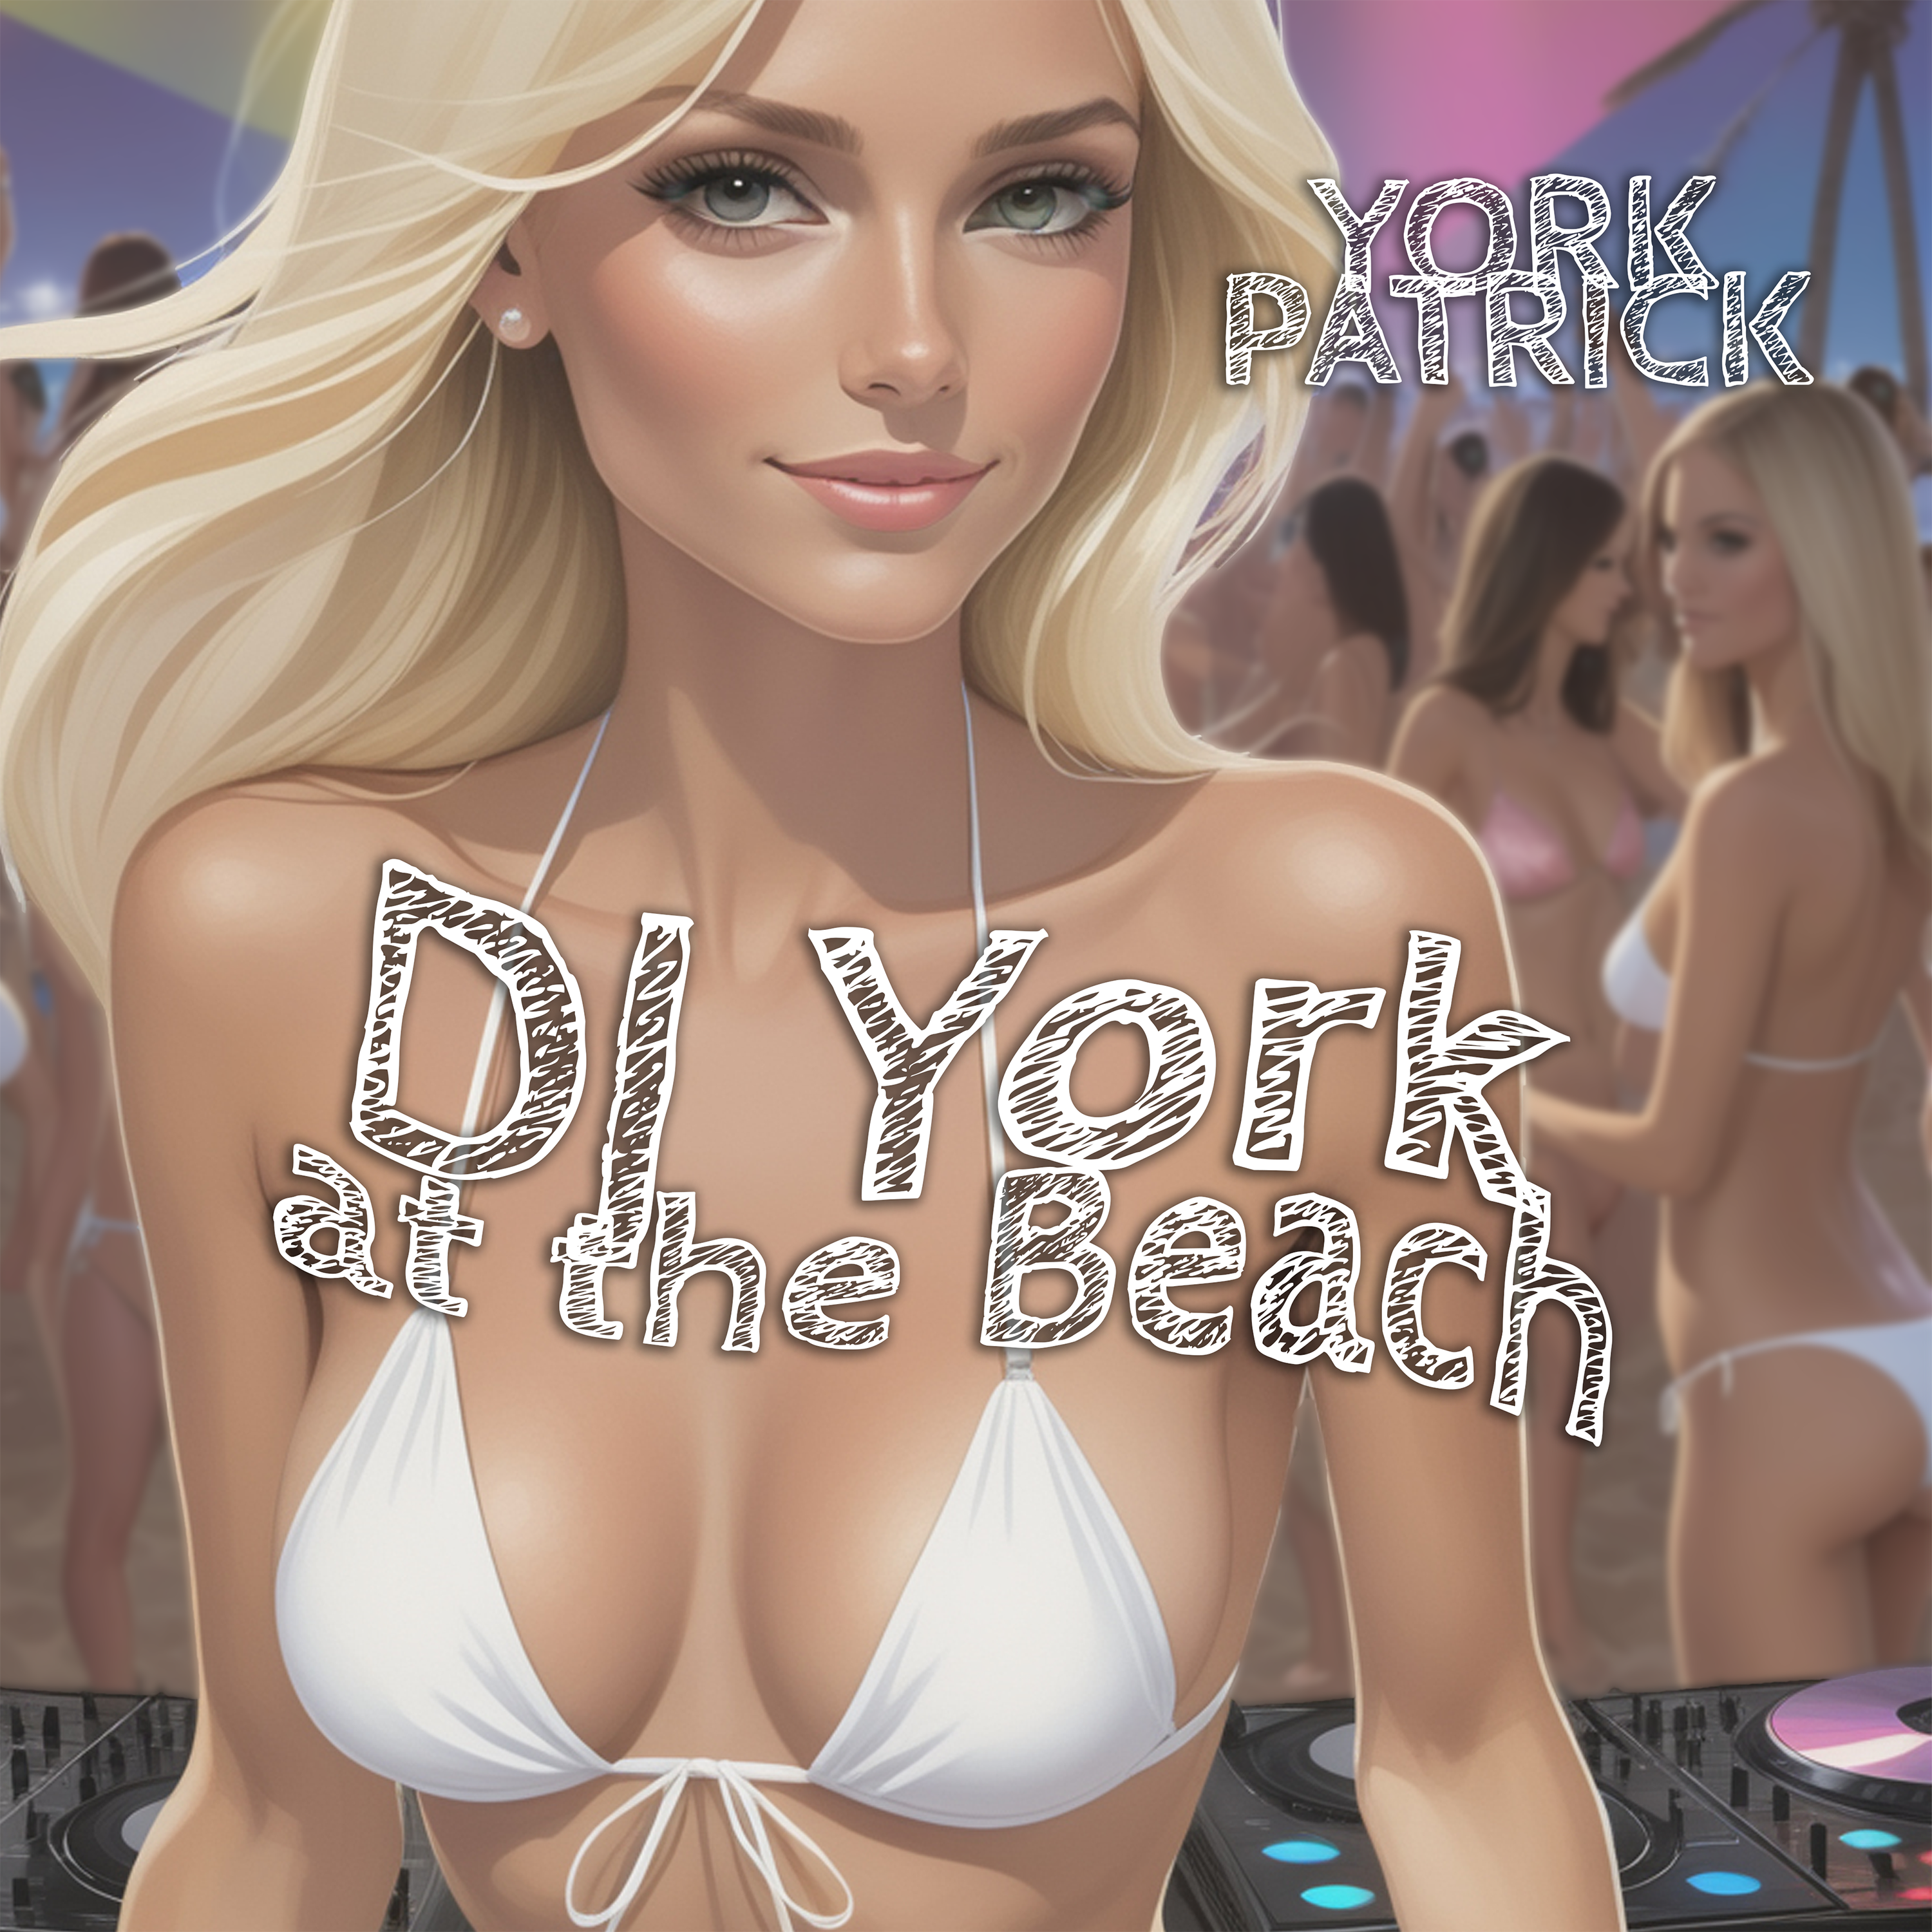 DJ York at the Beach Cover